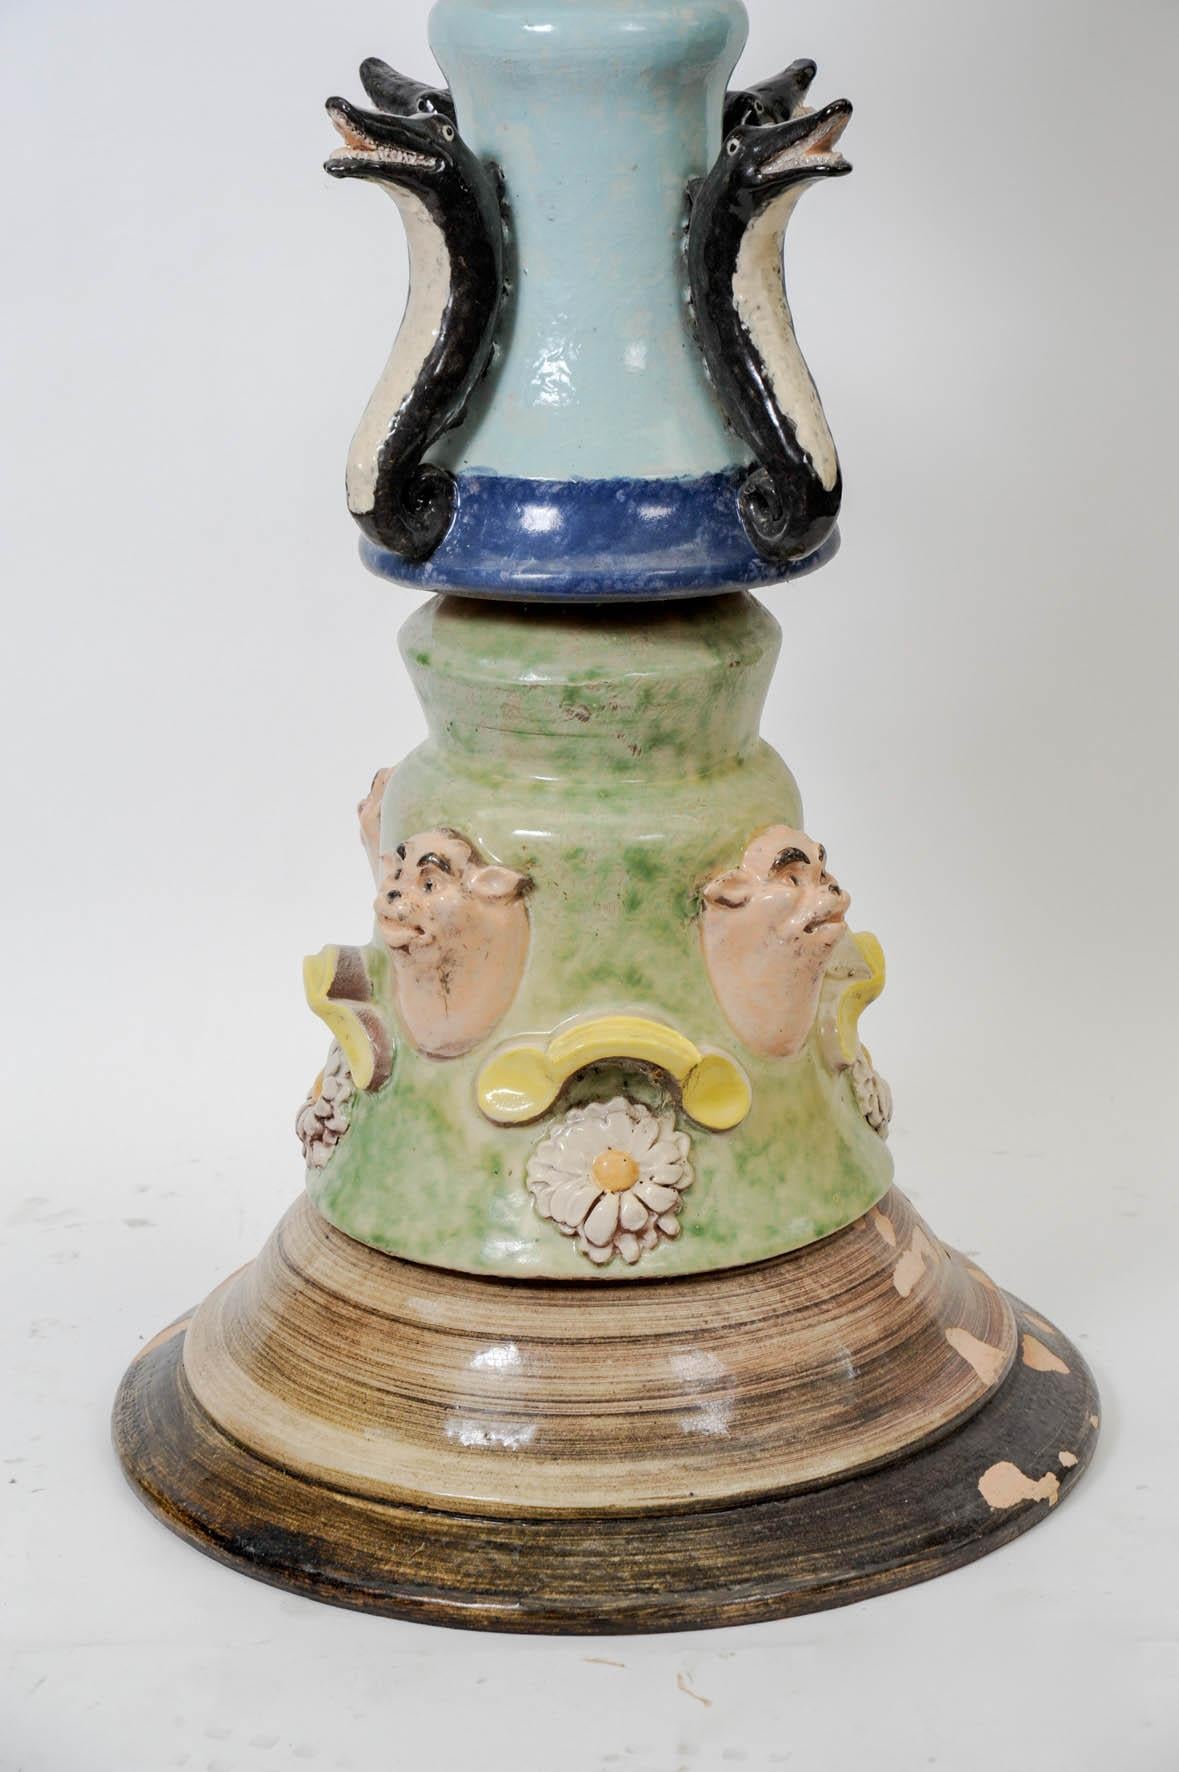 Unusual Finial in Vallauris ceramic
Small incident on the fist top piece (see picture)
Some enamel is missing on the base
Very good condition.